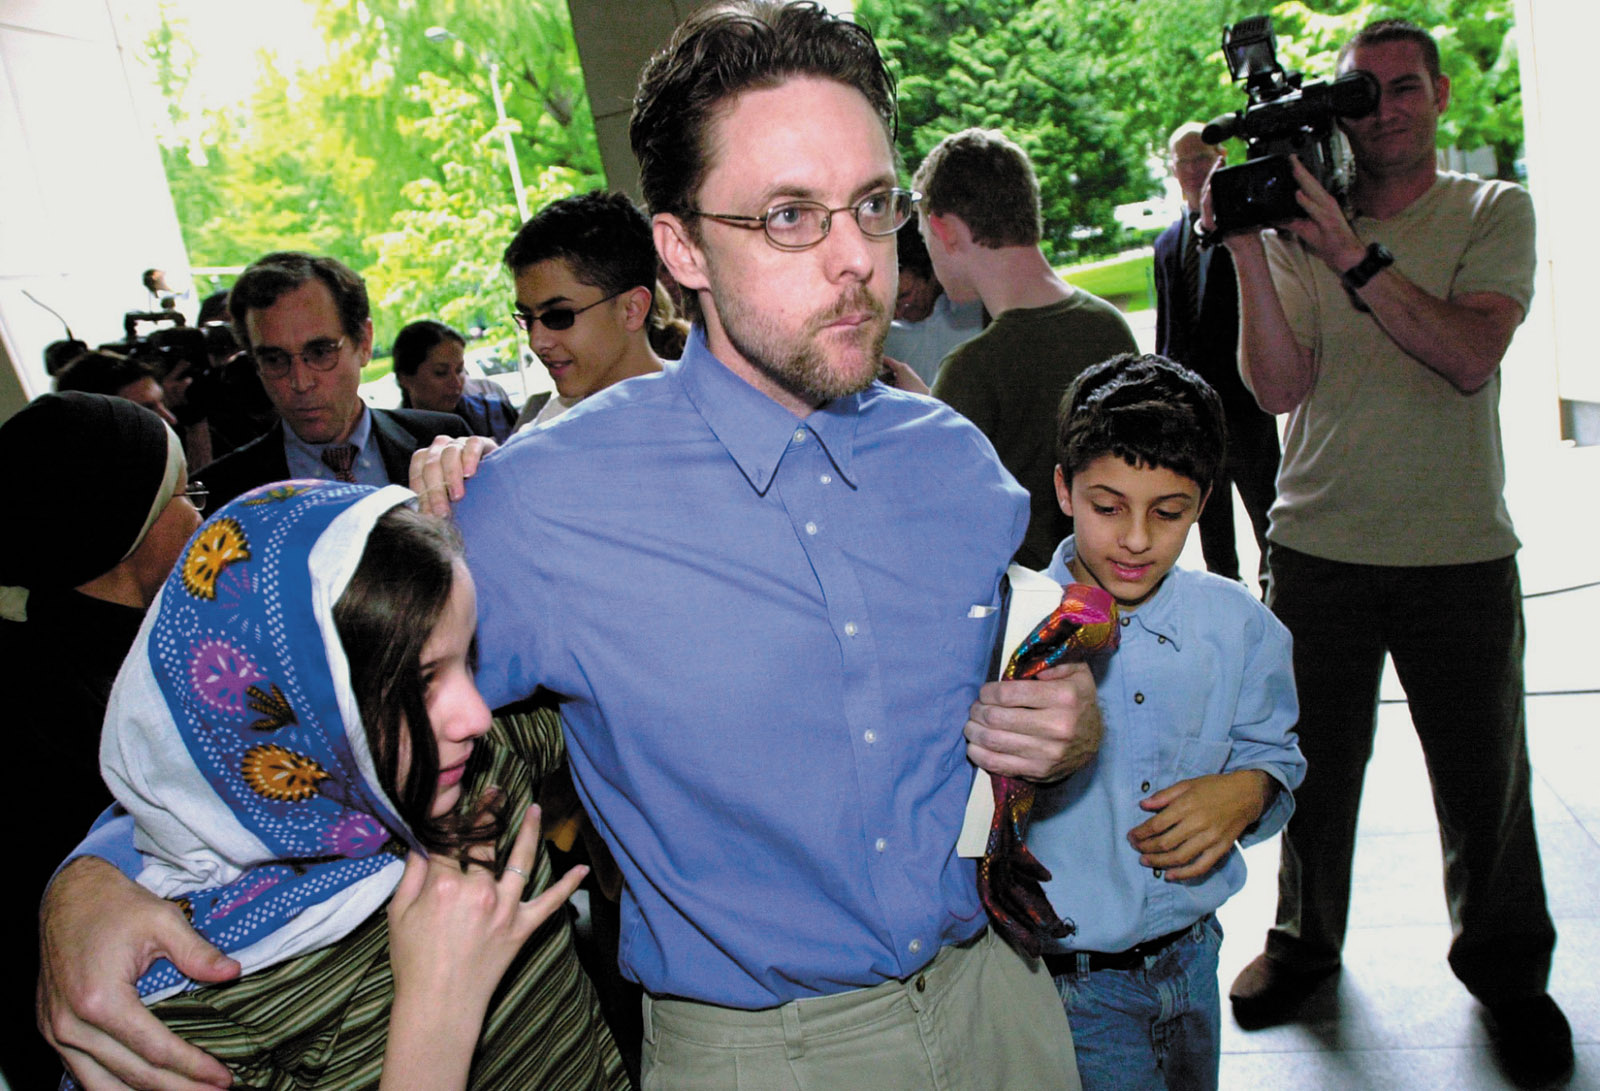 Brandon Mayfield and his children outside a federal courthouse after his release from custody, Portland, Oregon, May 2004. Mayfield was arrested after fingerprints on a bag found near the site of the 2004 Madrid bombings were mistakenly identified as his.